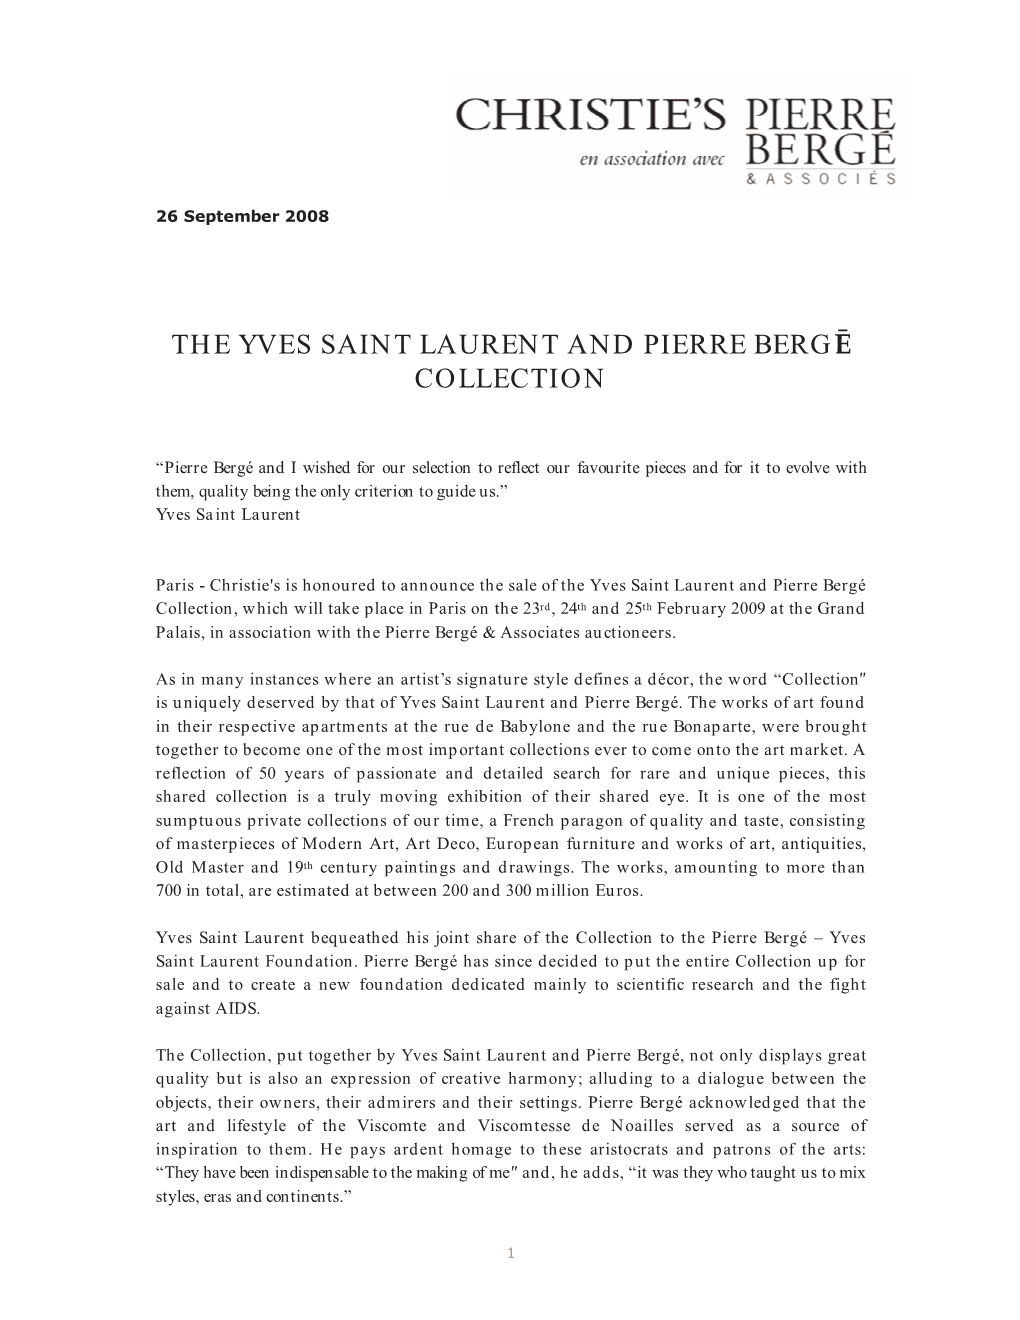 The Yves Saint Laurent and Pierre Bergē Collection